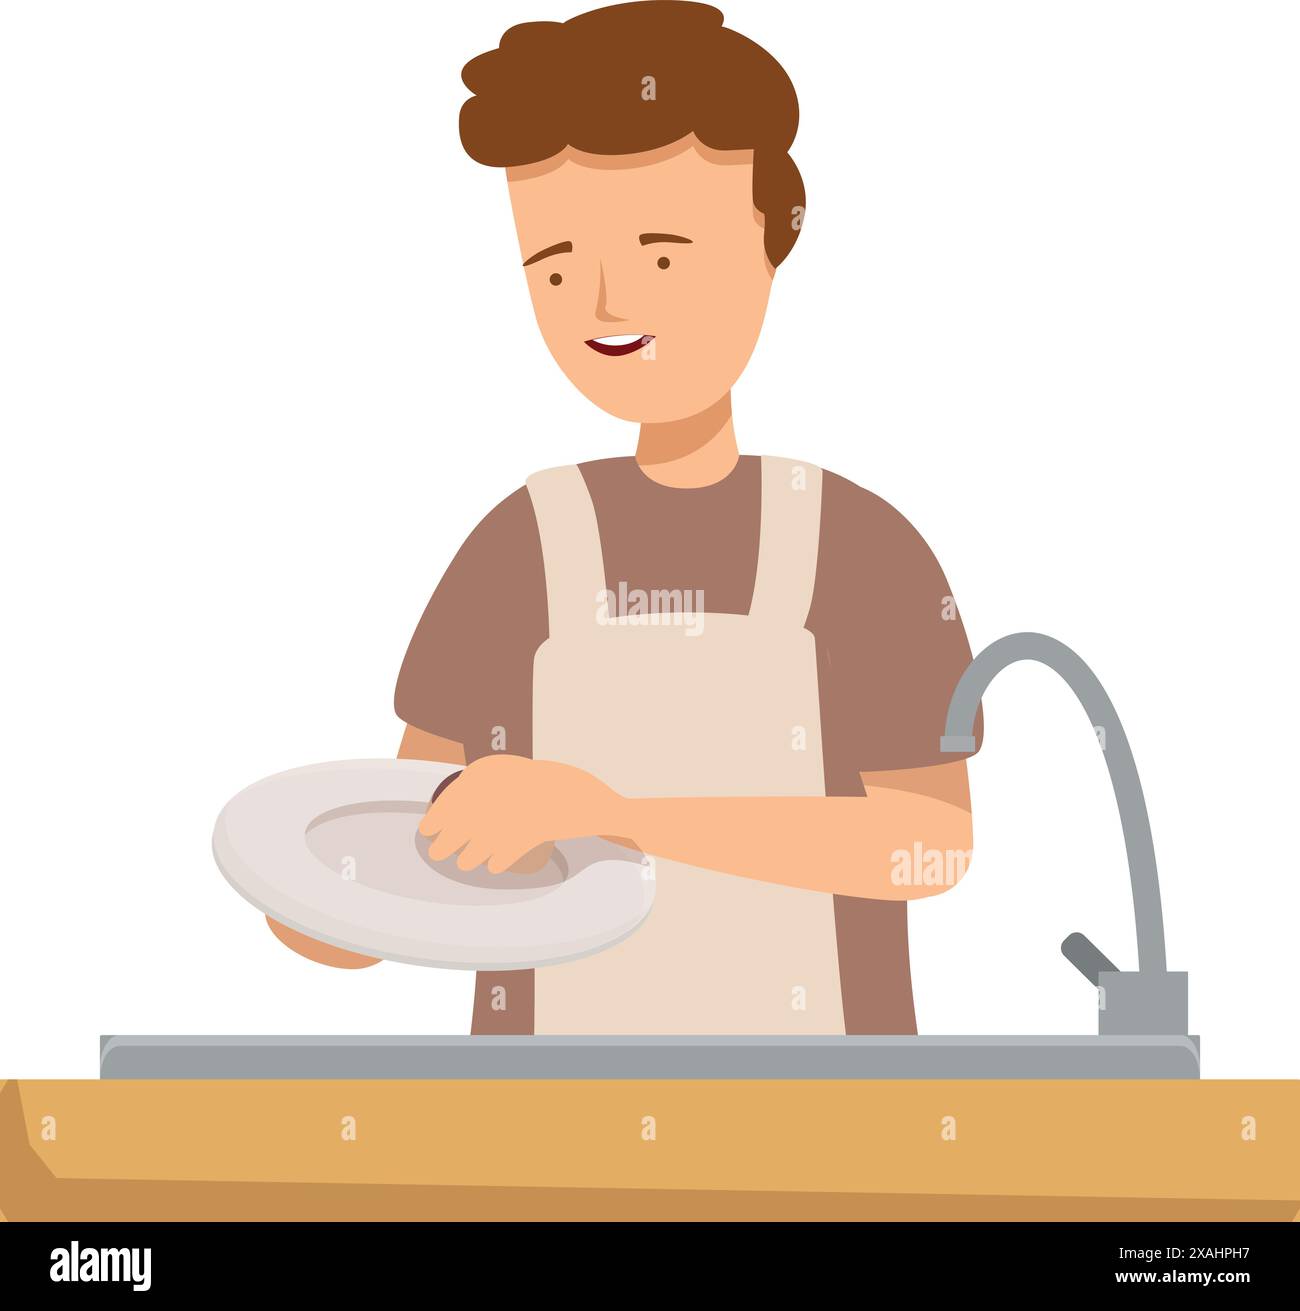 Young man is diligently washing dishes in the kitchen sink, representing domestic responsibility and cleanliness Stock Vector